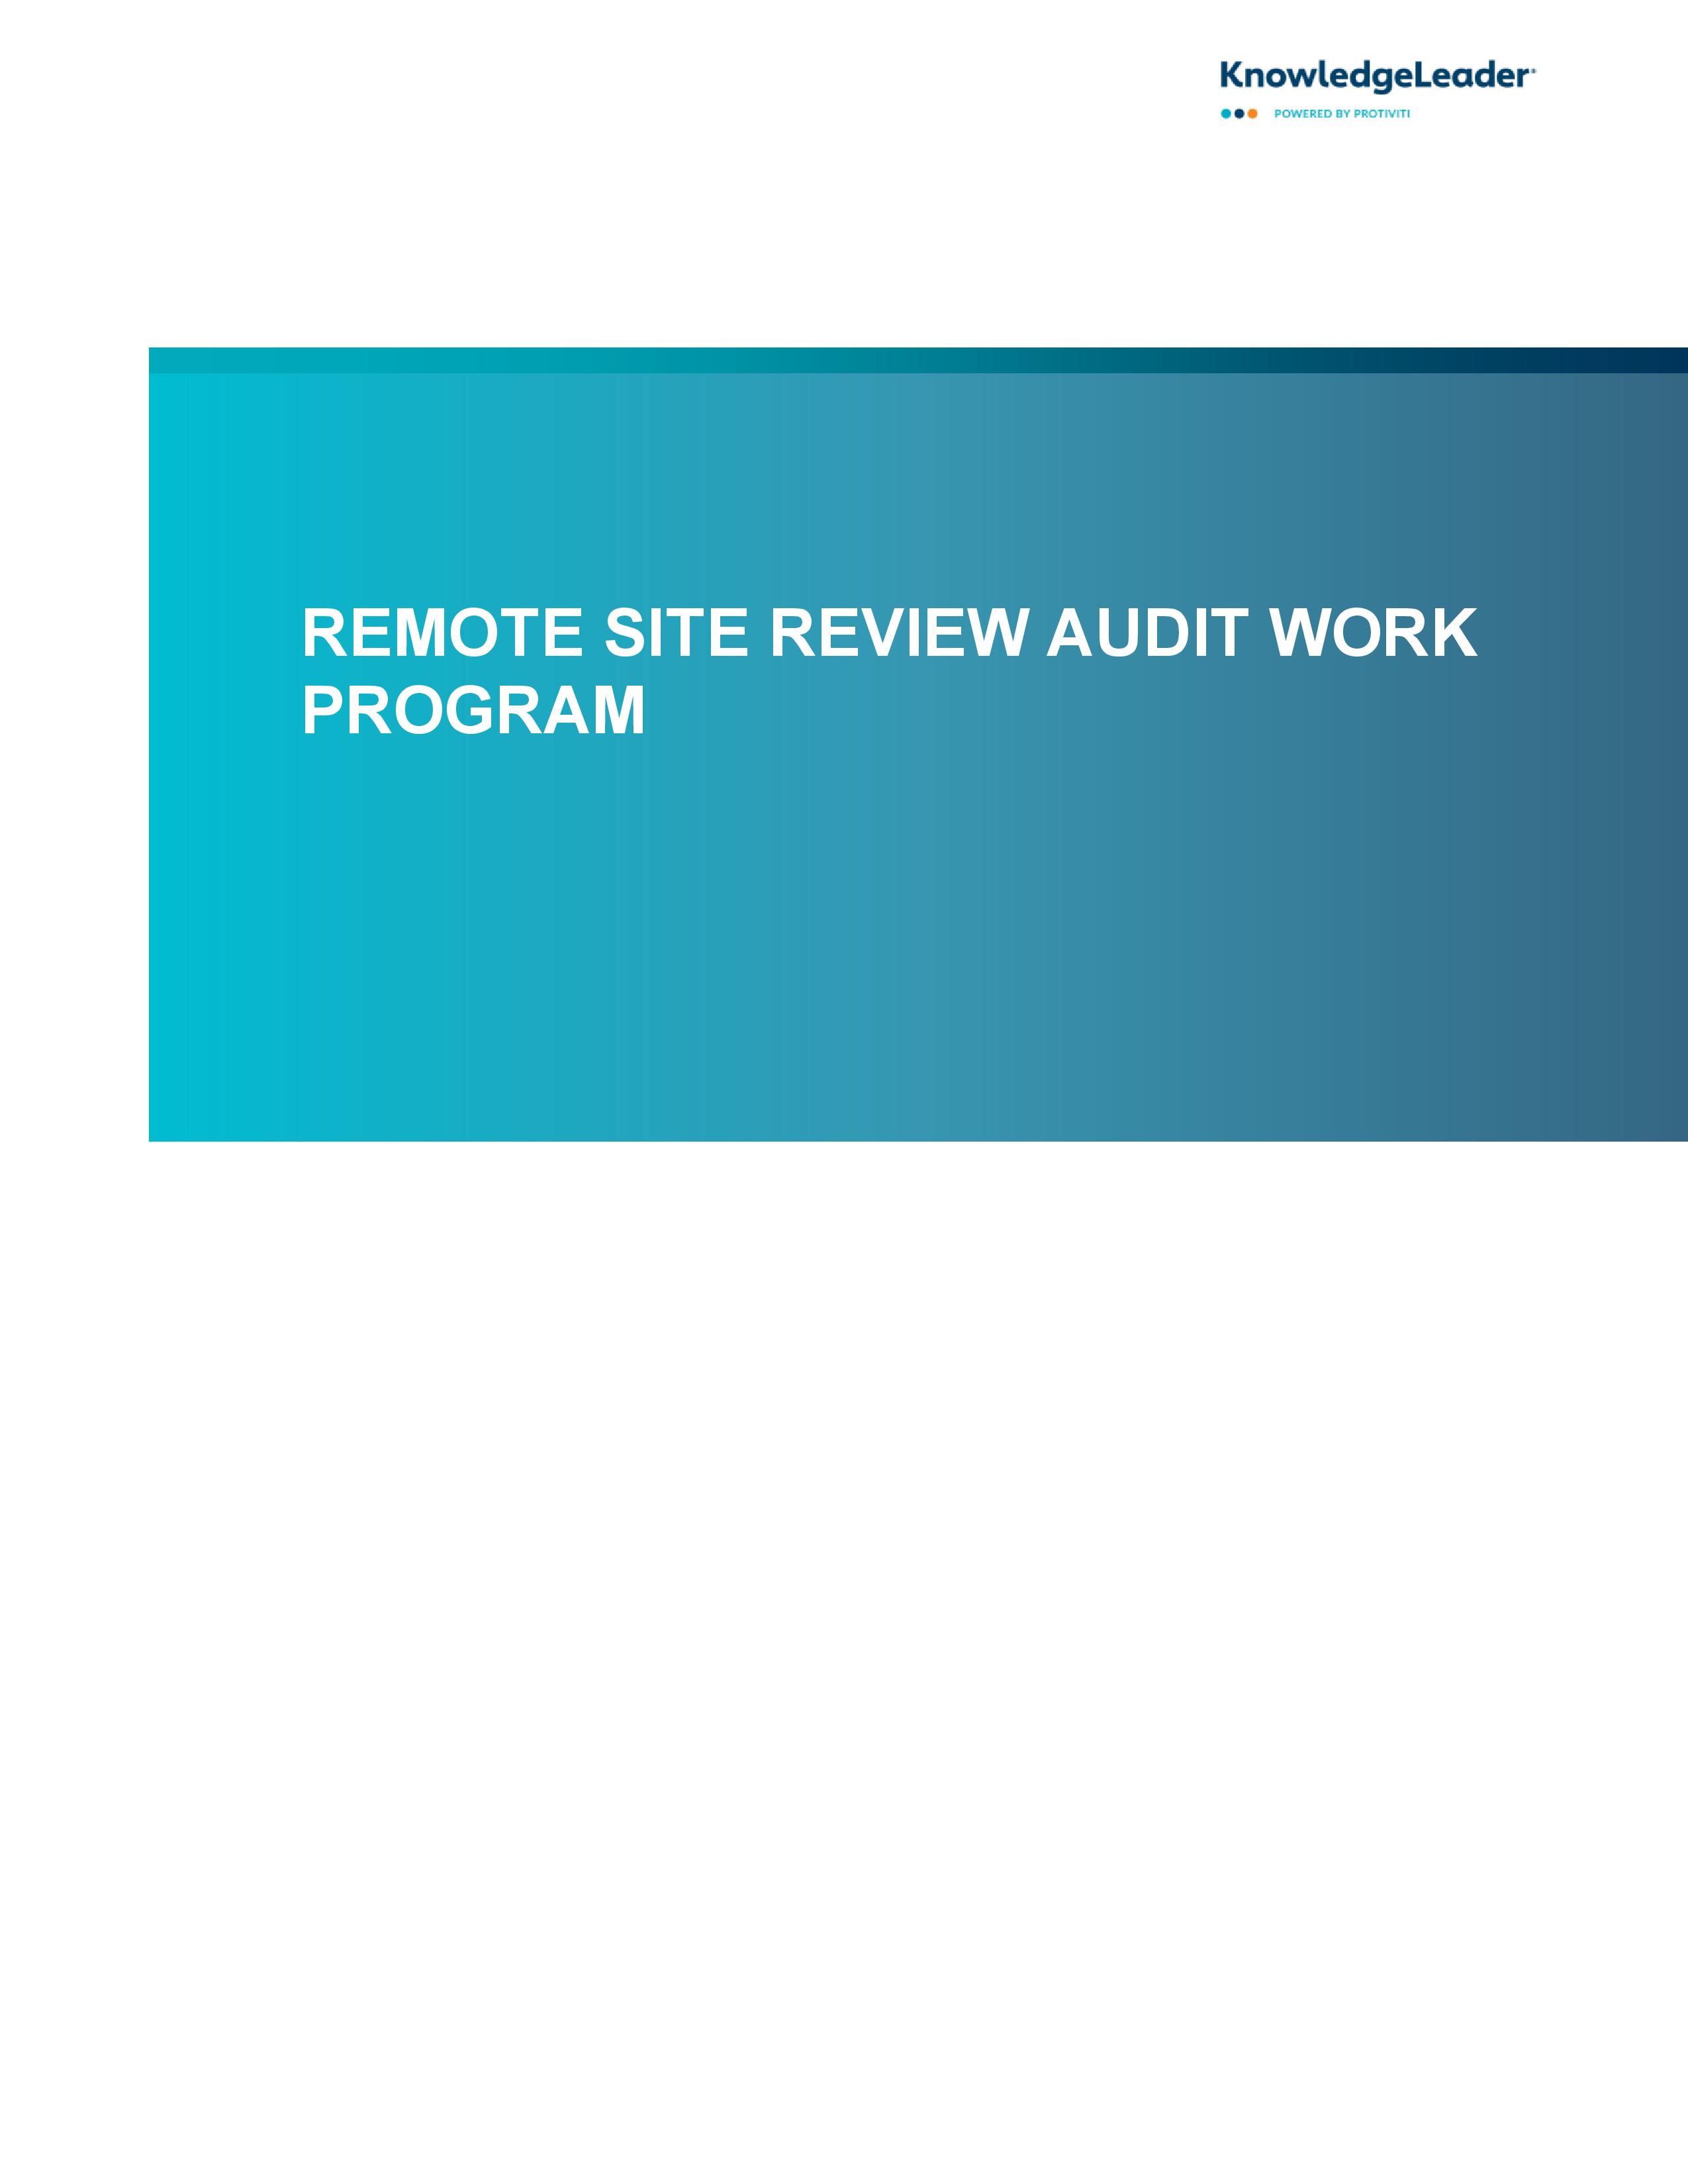 Screenshot of the first page of Remote Site Visit Audit Work Program